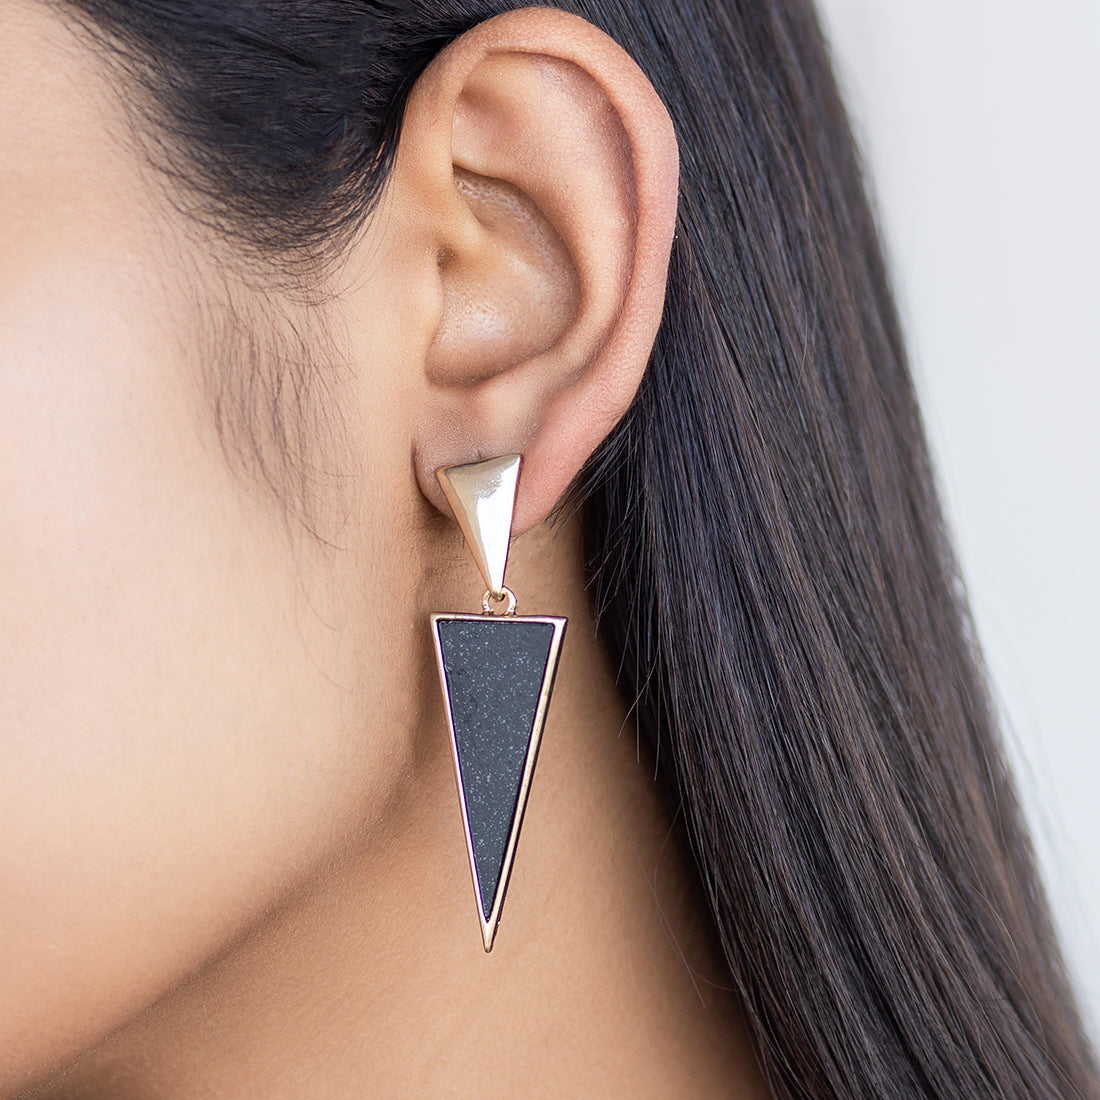 Contemporary Black Acrylic Gold-Toned Double Triangular Drop Earrings